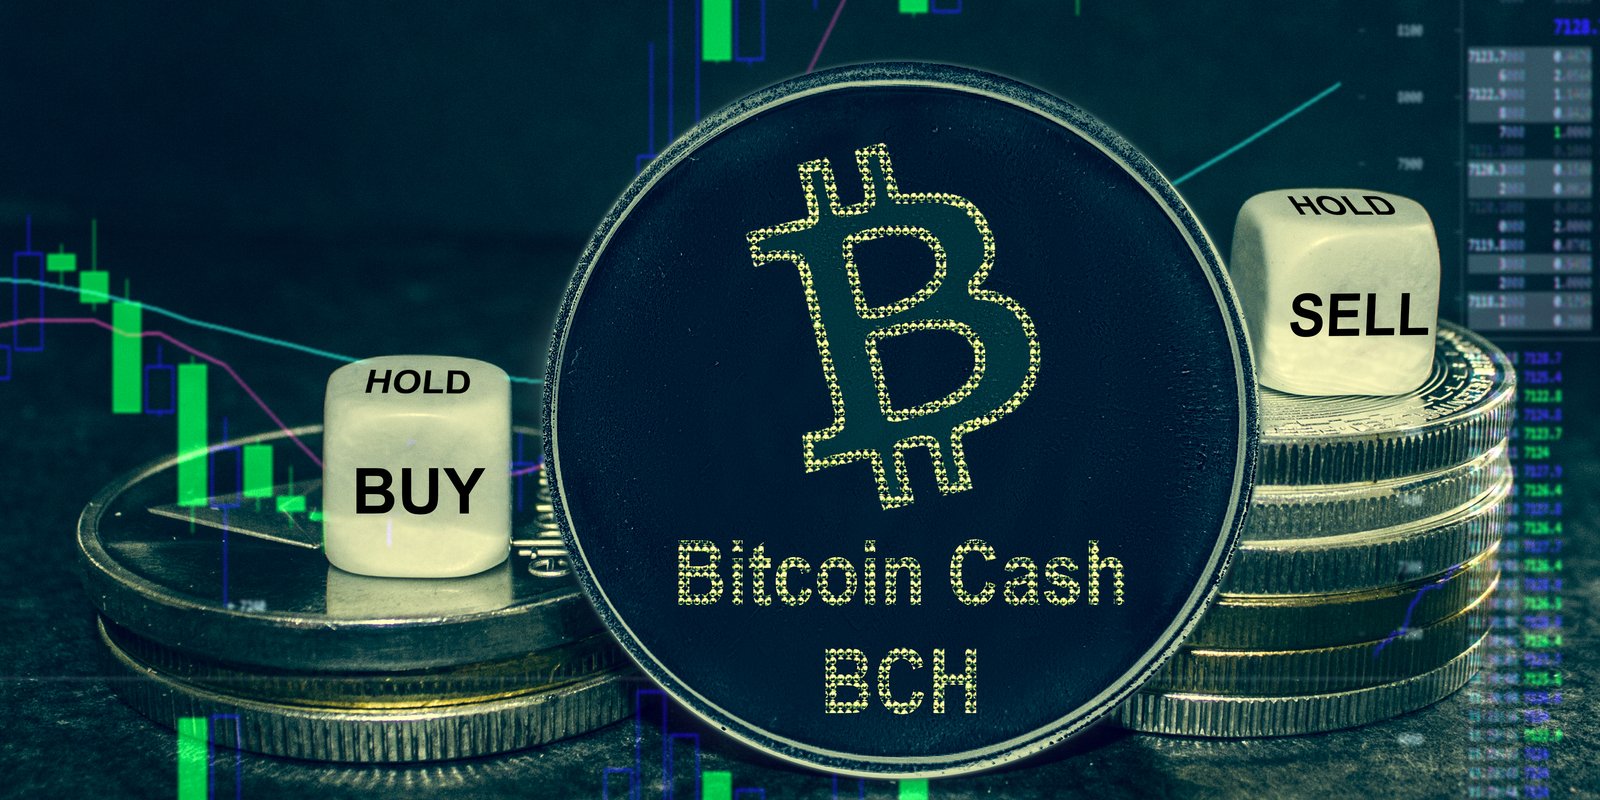 Can bitcoin be exchanged for cash обменять биткоин на наличные рубли москва